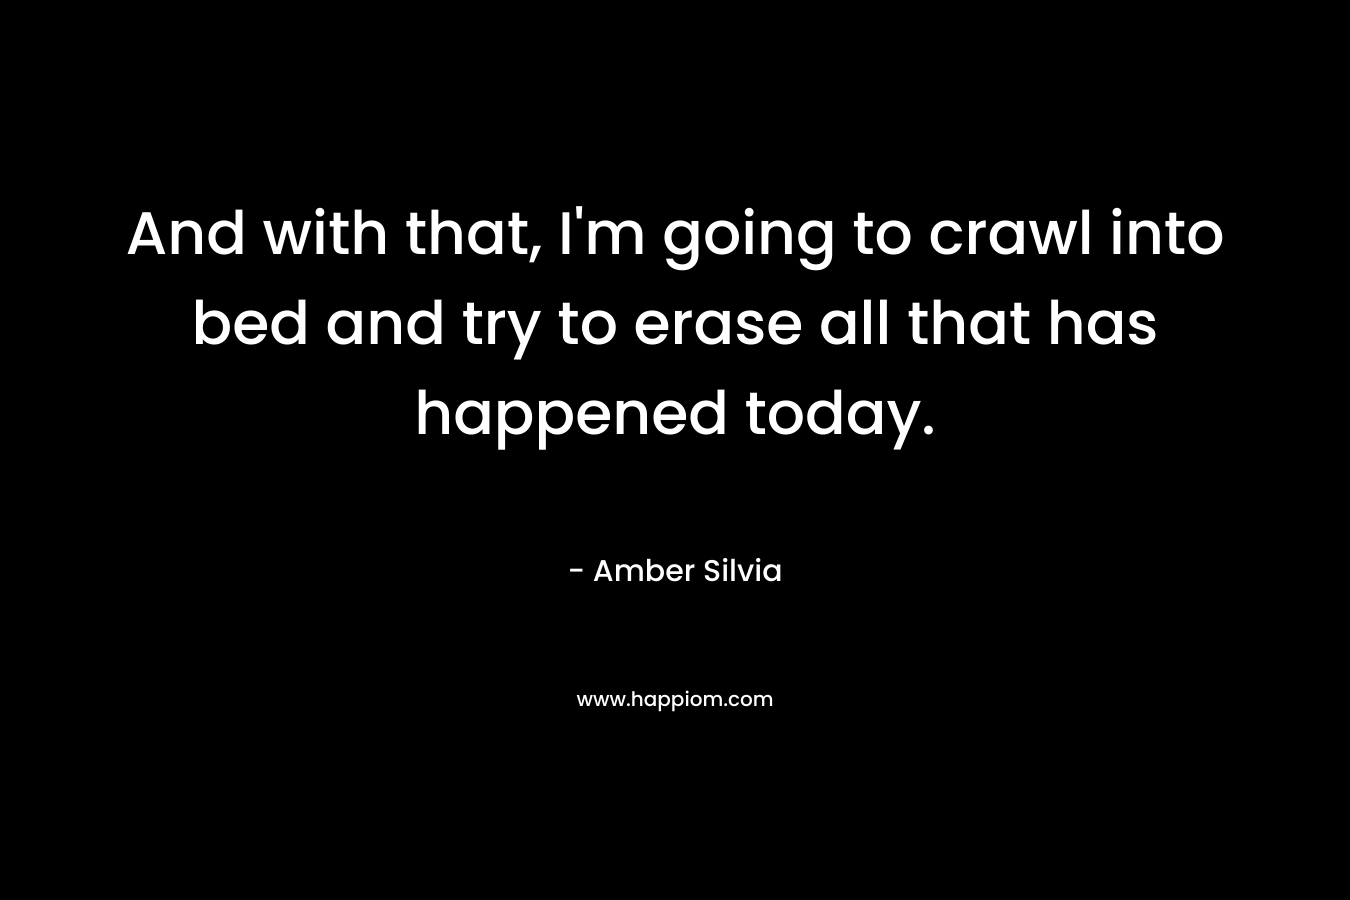 And with that, I’m going to crawl into bed and try to erase all that has happened today. – Amber Silvia